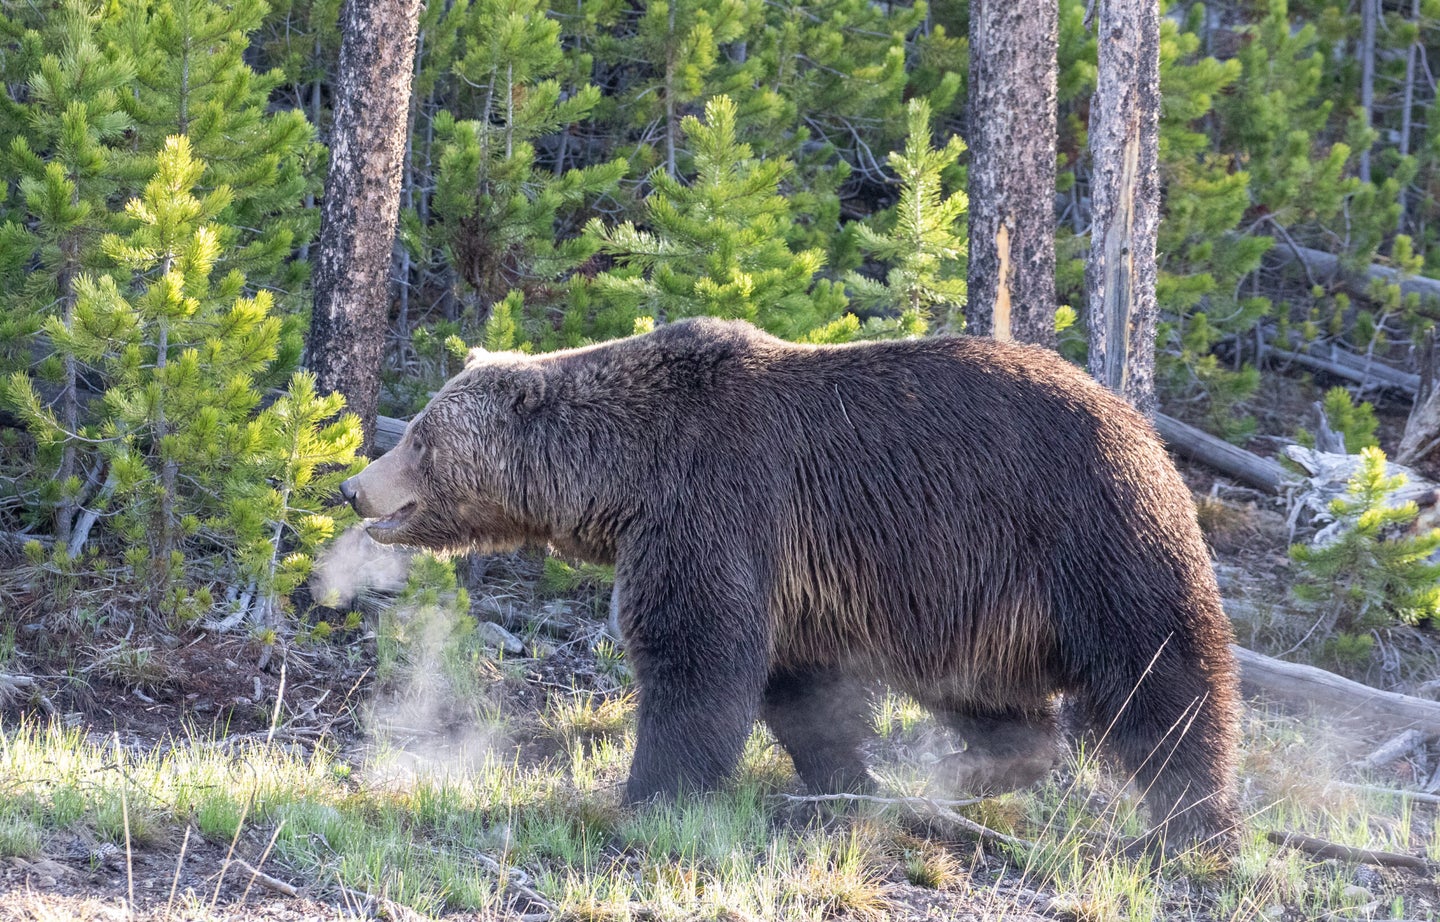 Grizzly bear walks through forest